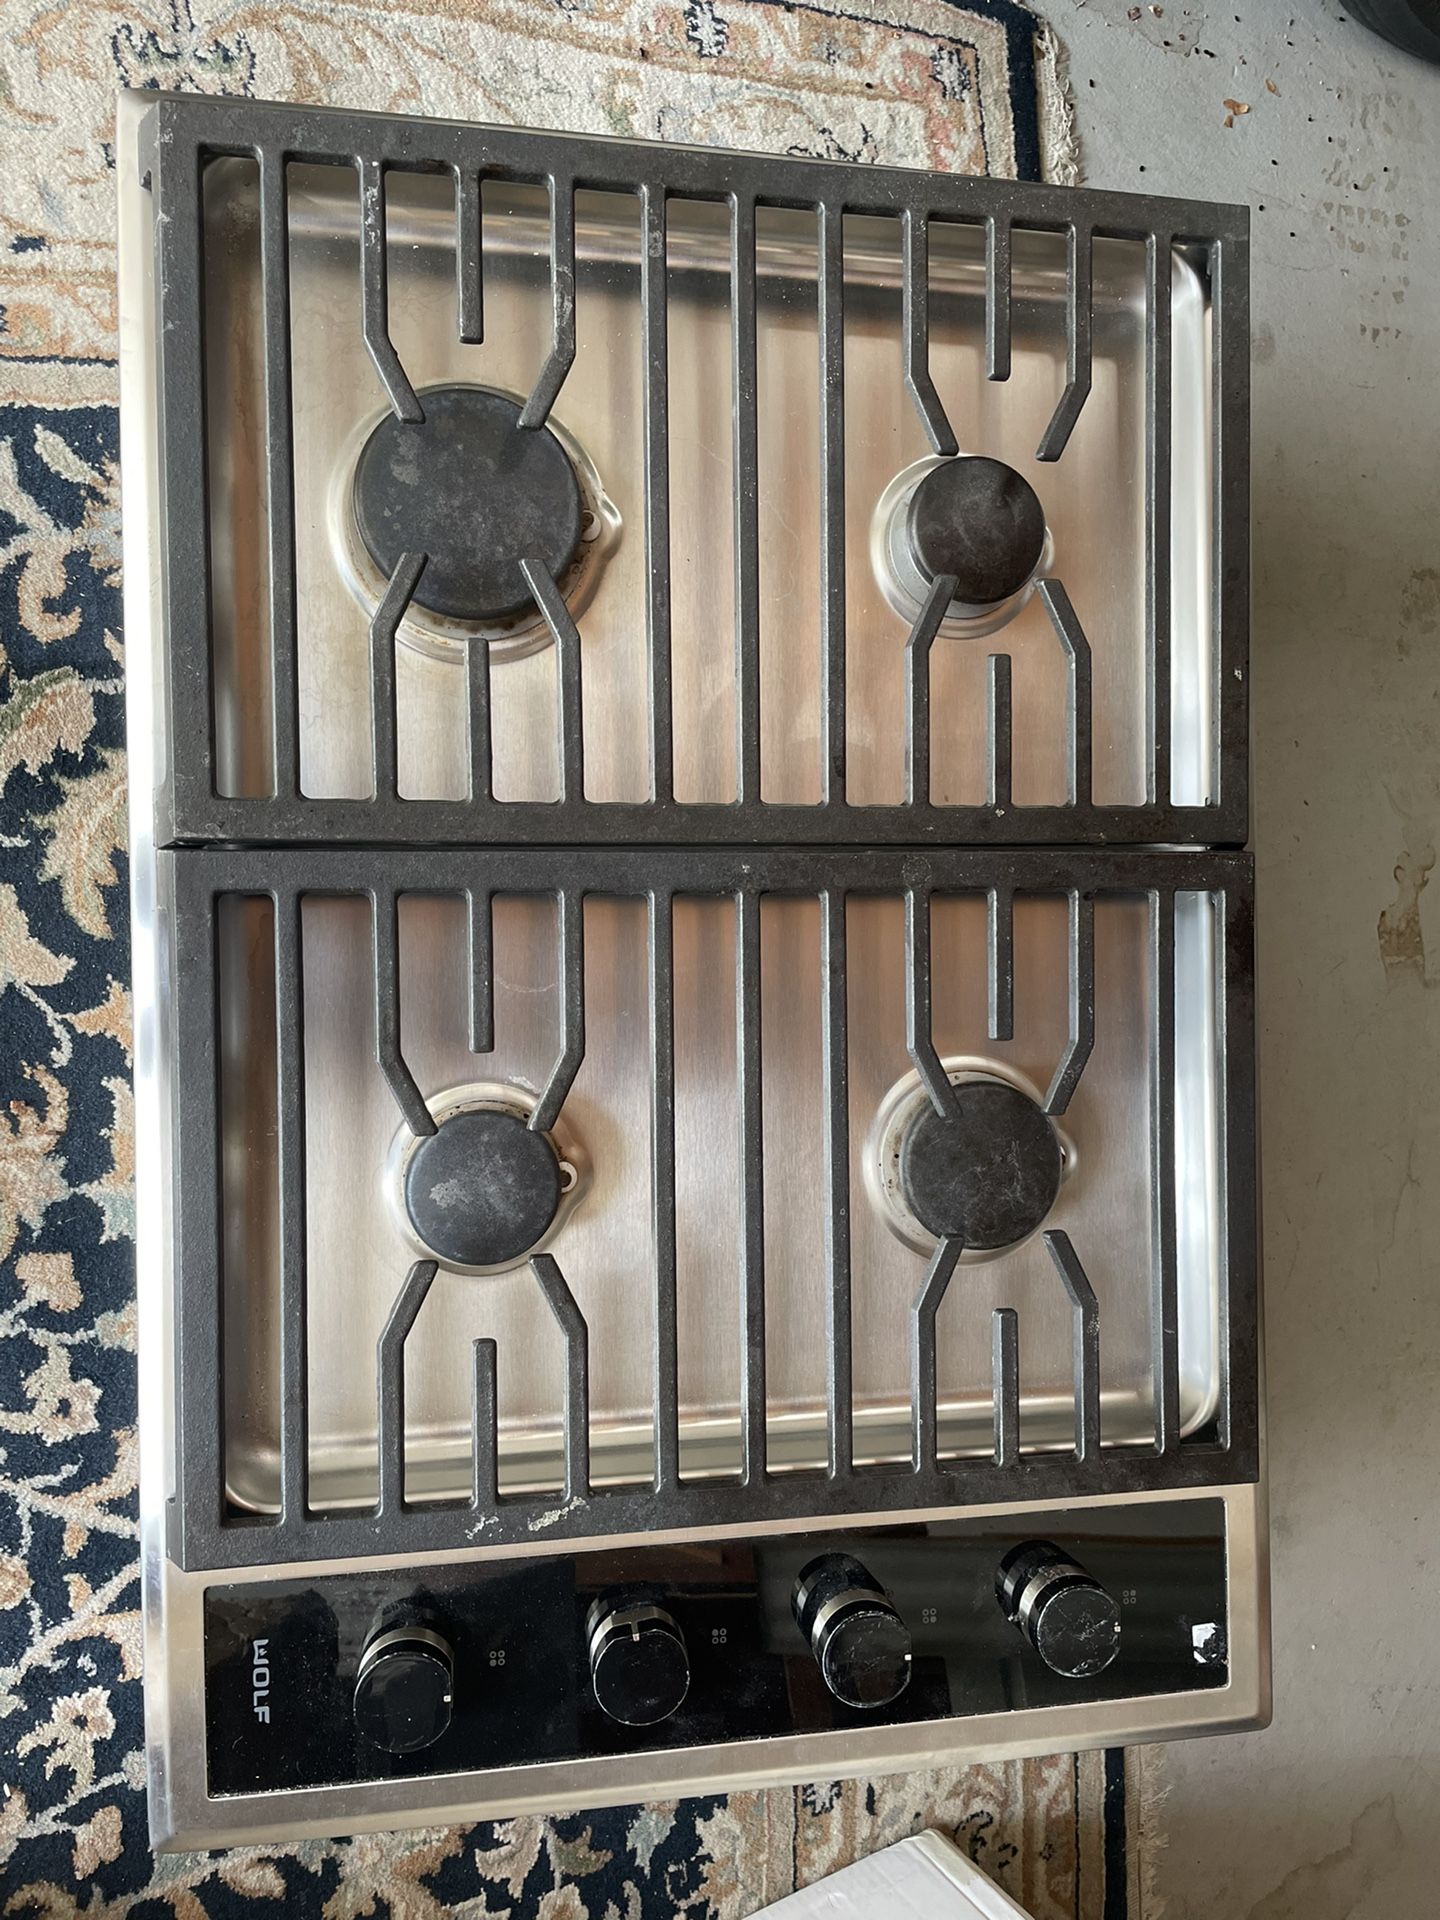 Wolf stovetop in excellent condition